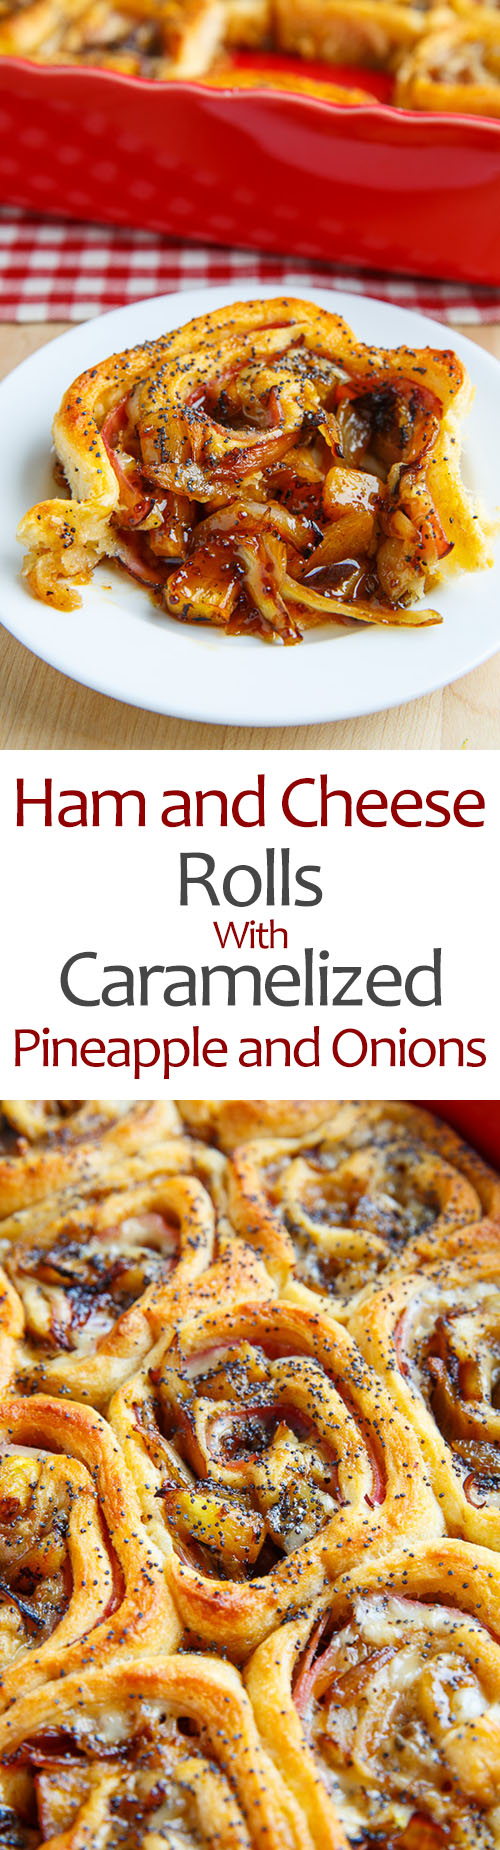 Ham and Cheese Rolls with Caramelized Pineapple and Onions